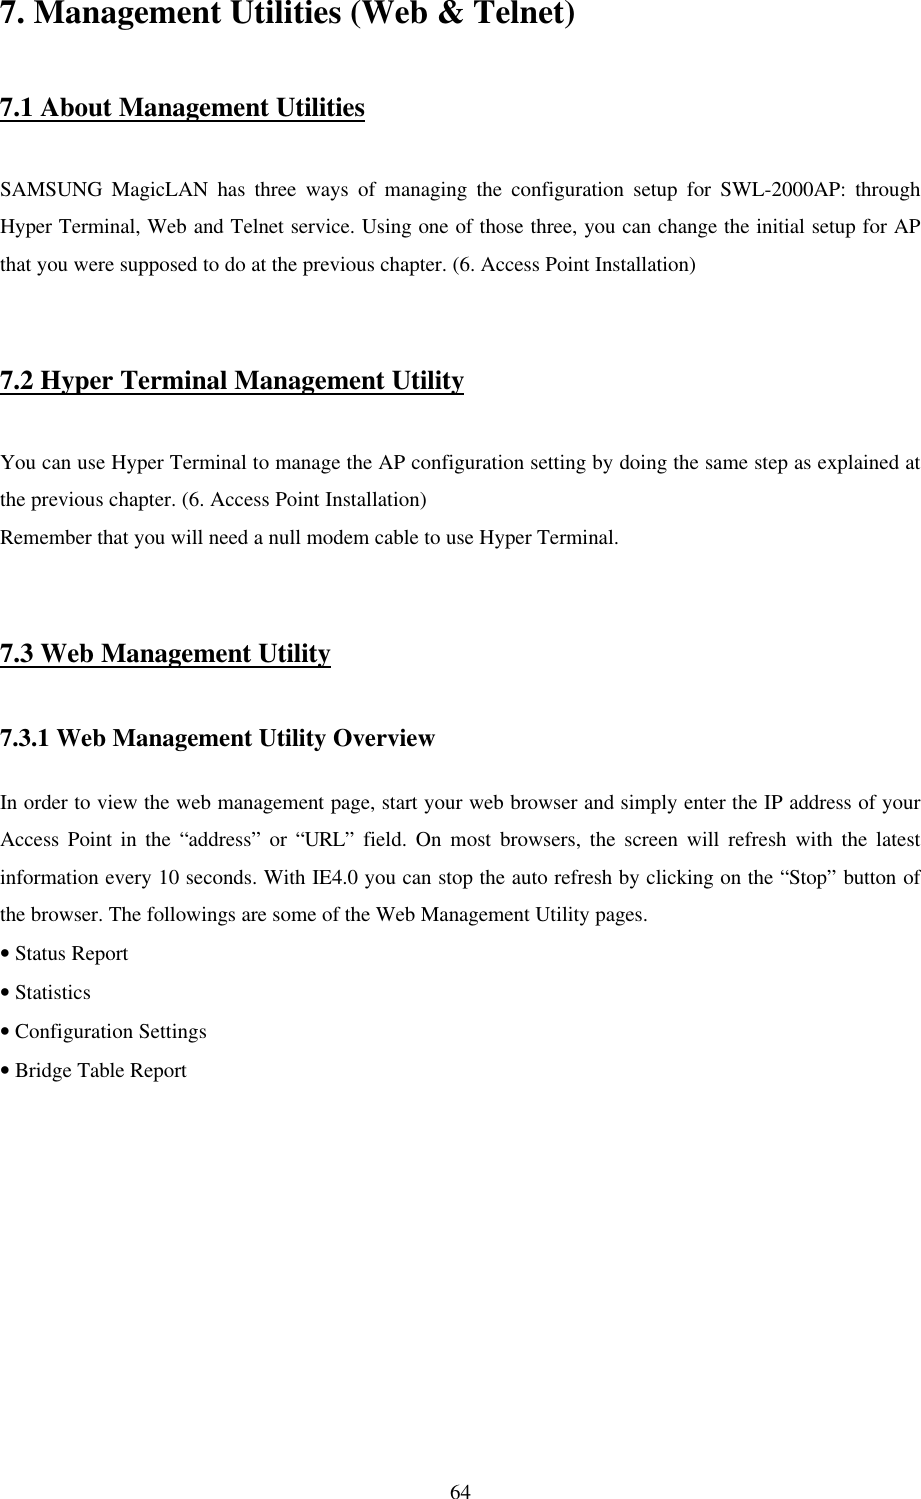 647. Management Utilities (Web &amp; Telnet)7.1 About Management UtilitiesSAMSUNG MagicLAN has three ways of managing the configuration setup for SWL-2000AP: throughHyper Terminal, Web and Telnet service. Using one of those three, you can change the initial setup for APthat you were supposed to do at the previous chapter. (6. Access Point Installation)7.2 Hyper Terminal Management UtilityYou can use Hyper Terminal to manage the AP configuration setting by doing the same step as explained atthe previous chapter. (6. Access Point Installation)Remember that you will need a null modem cable to use Hyper Terminal.7.3 Web Management Utility7.3.1 Web Management Utility OverviewIn order to view the web management page, start your web browser and simply enter the IP address of yourAccess Point in the “address” or “URL” field. On most browsers, the screen will refresh with the latestinformation every 10 seconds. With IE4.0 you can stop the auto refresh by clicking on the “Stop” button ofthe browser. The followings are some of the Web Management Utility pages.• Status Report• Statistics• Configuration Settings• Bridge Table Report